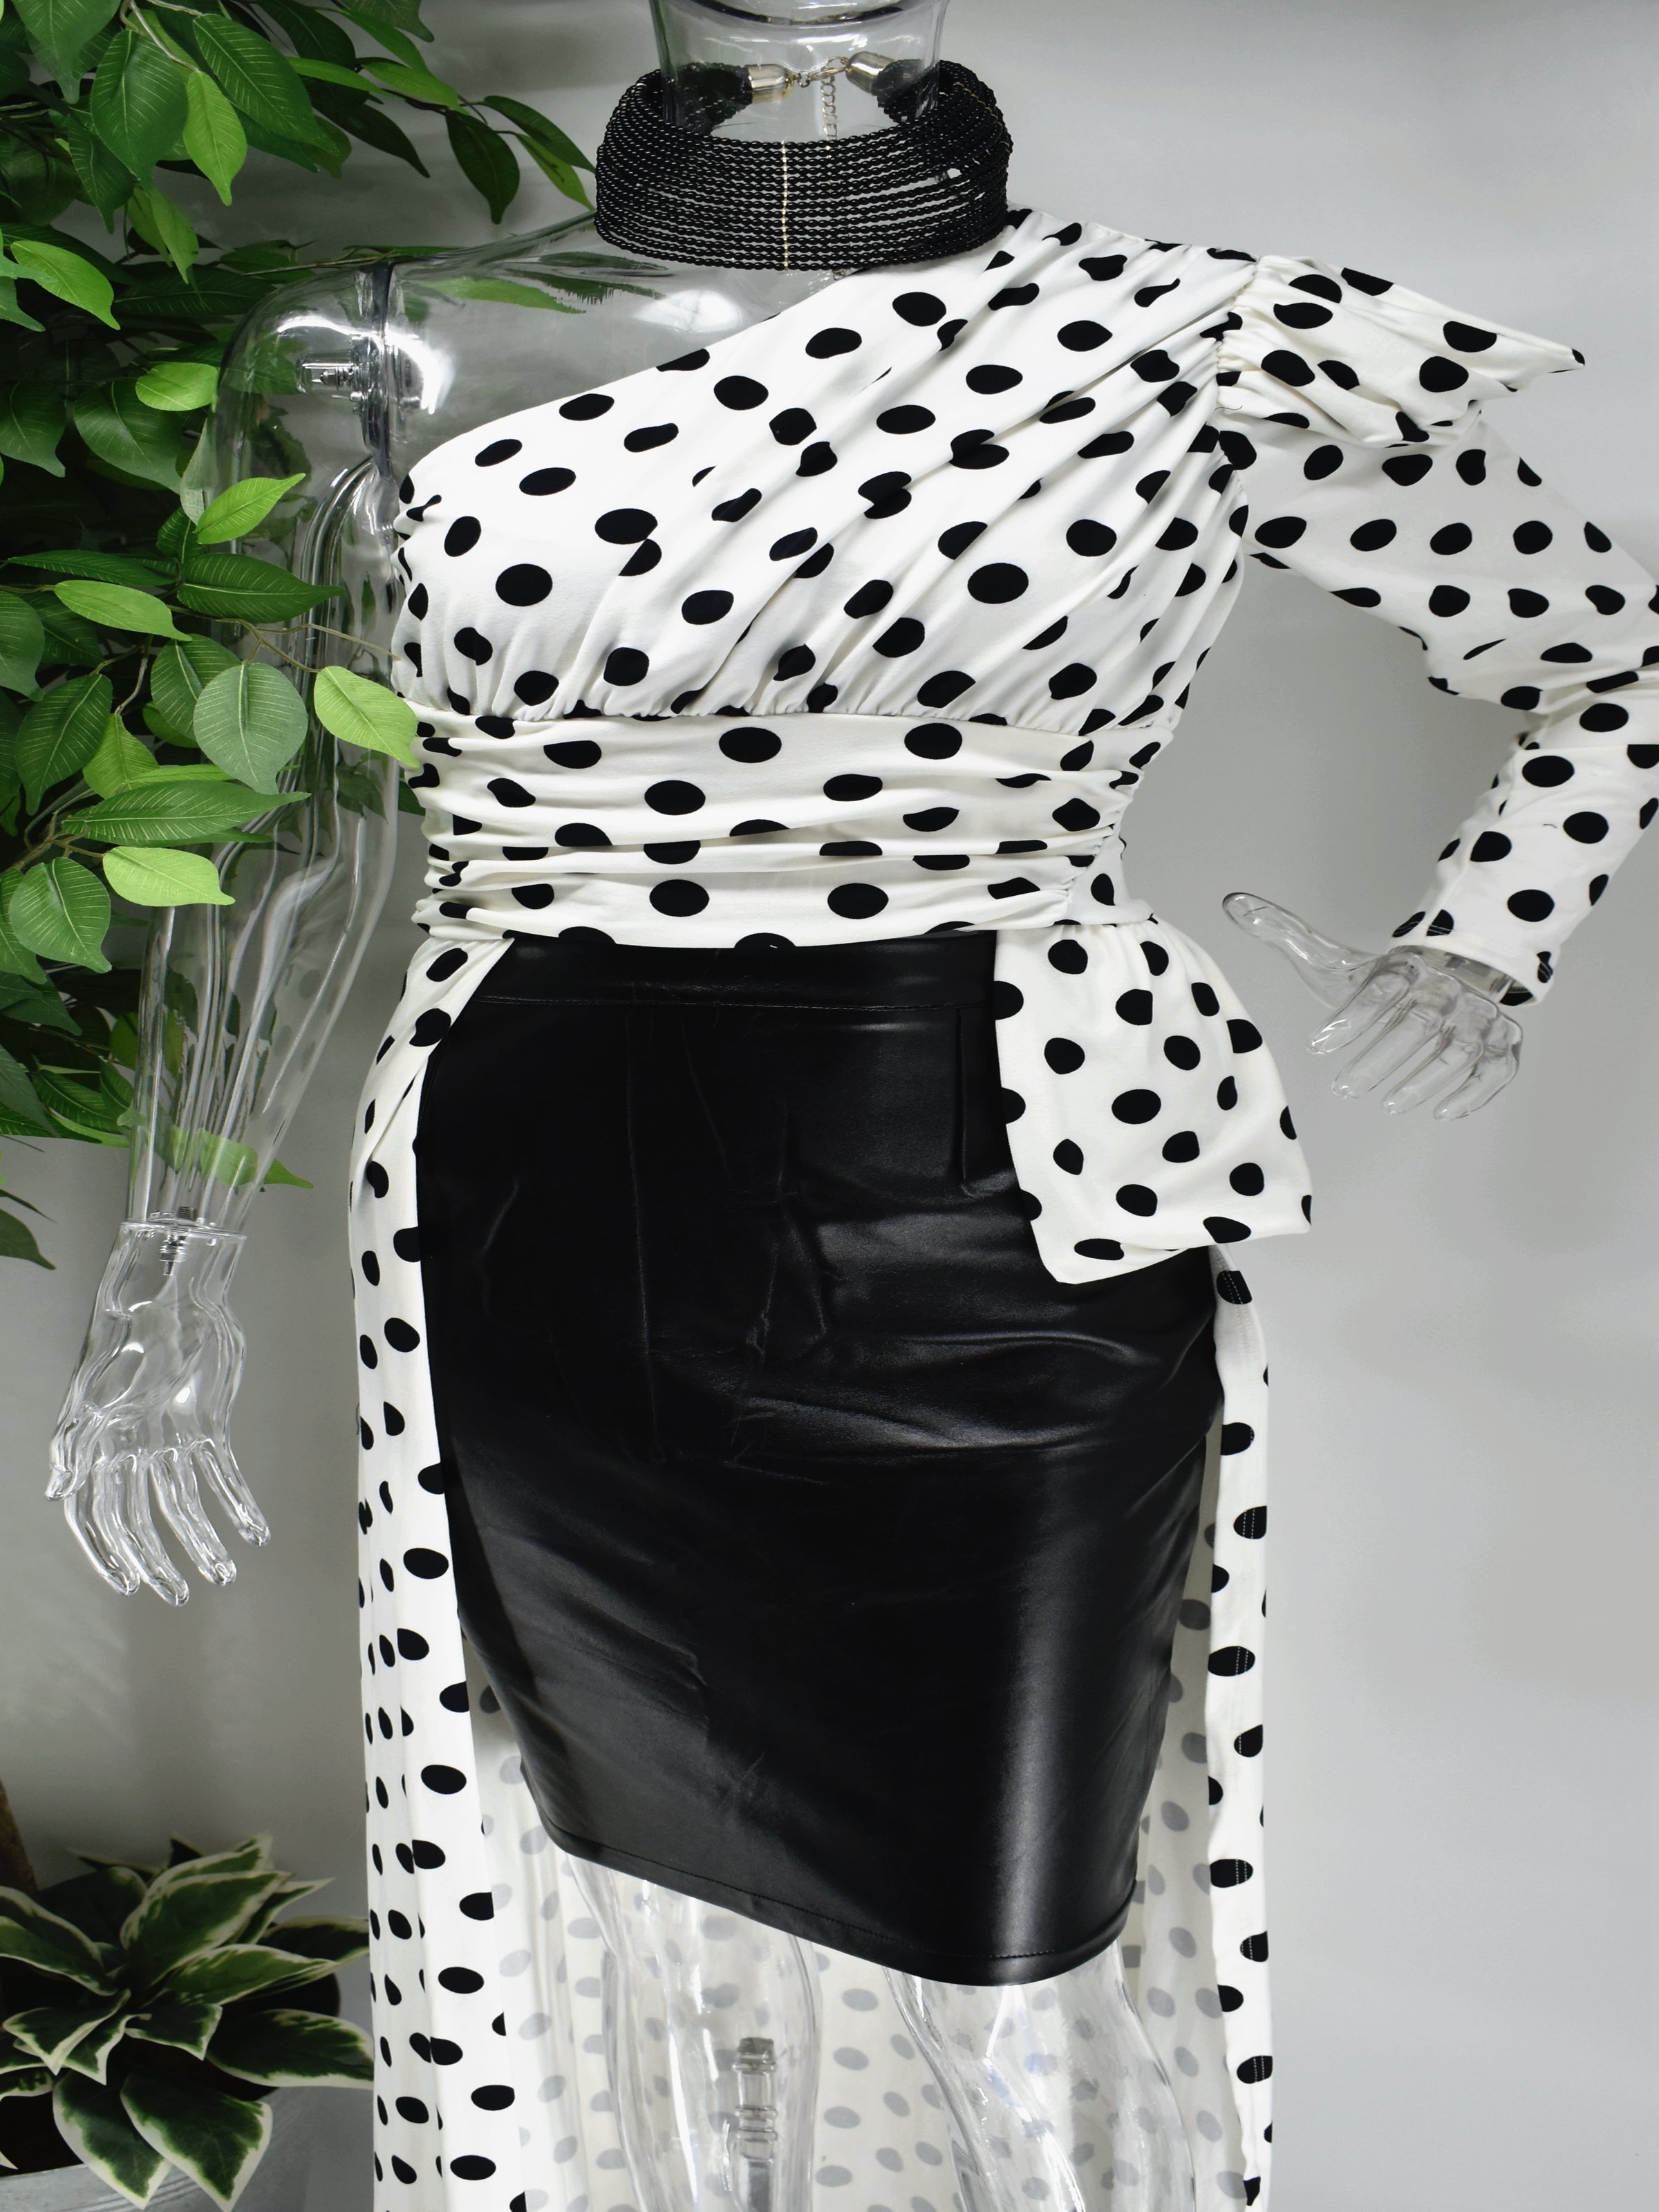 Let's go out and get Jiggy in our Biddy white with black polka dot top. Biddy's unique one sleeved asymmetrical design is complimented with a short and long hem. This top would be great paired with skirts, pants leggings or shorts.